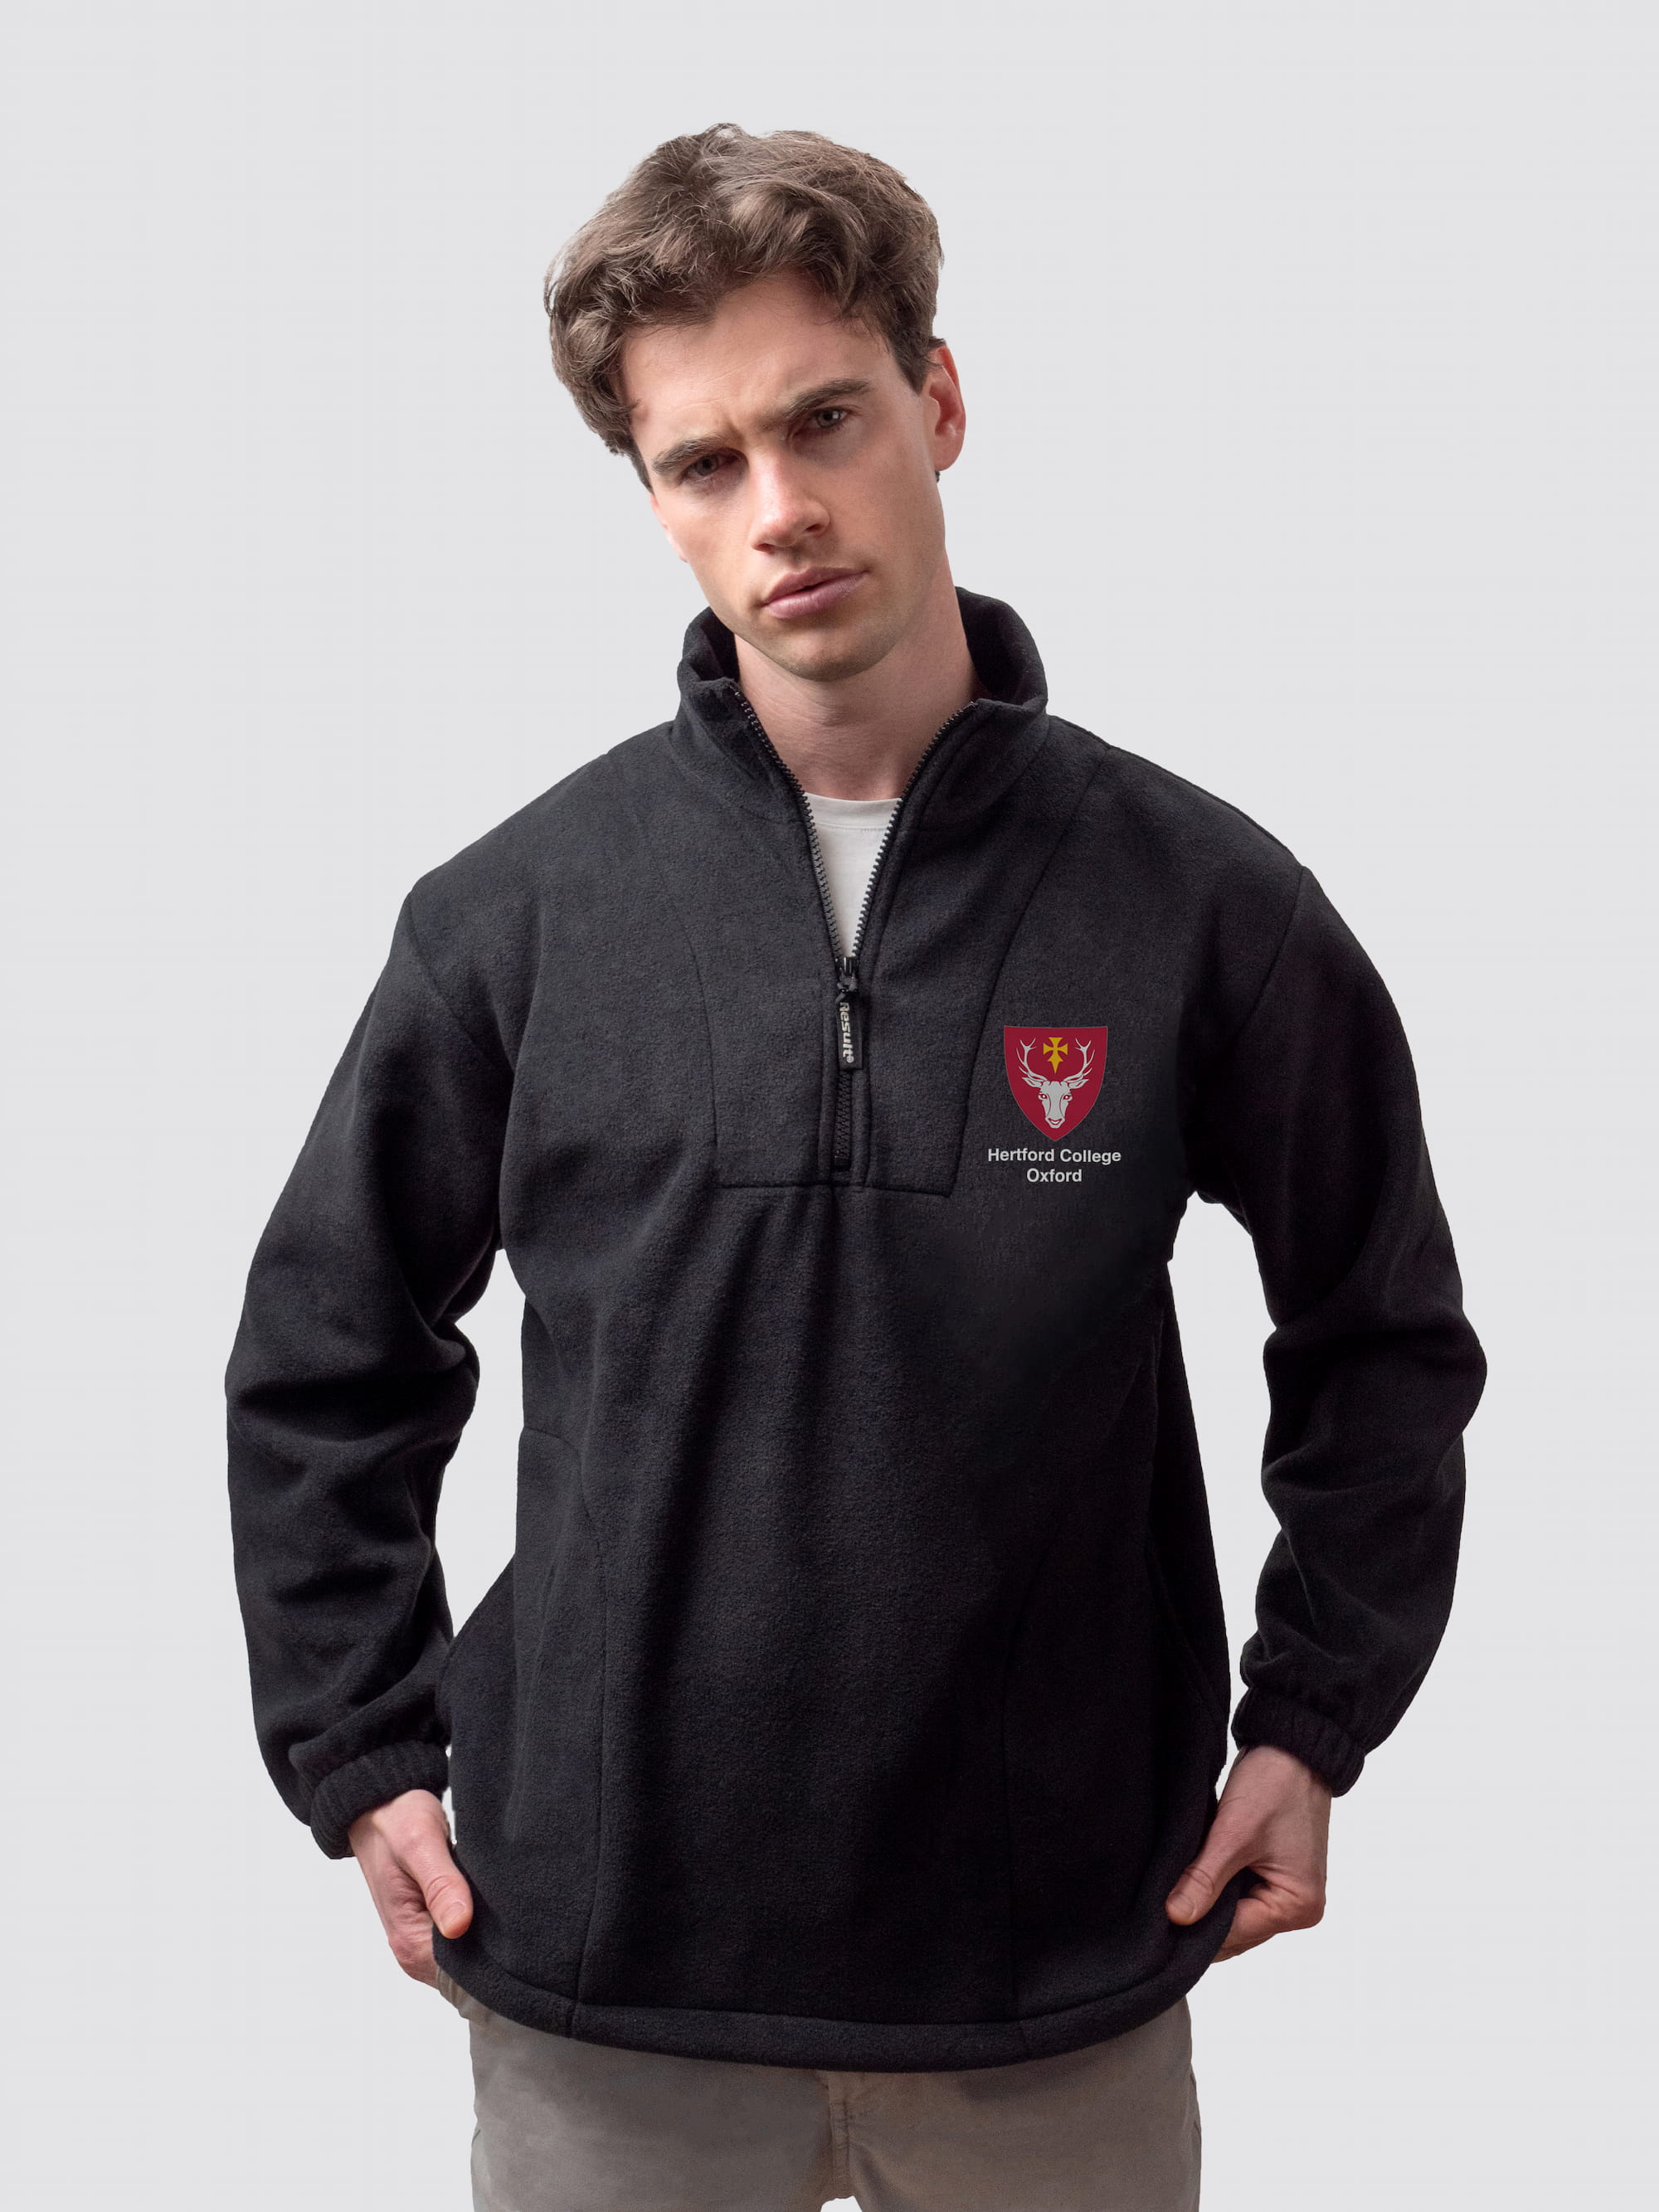 Oxford university fleece, with custom embroidered initials and Hertford crest